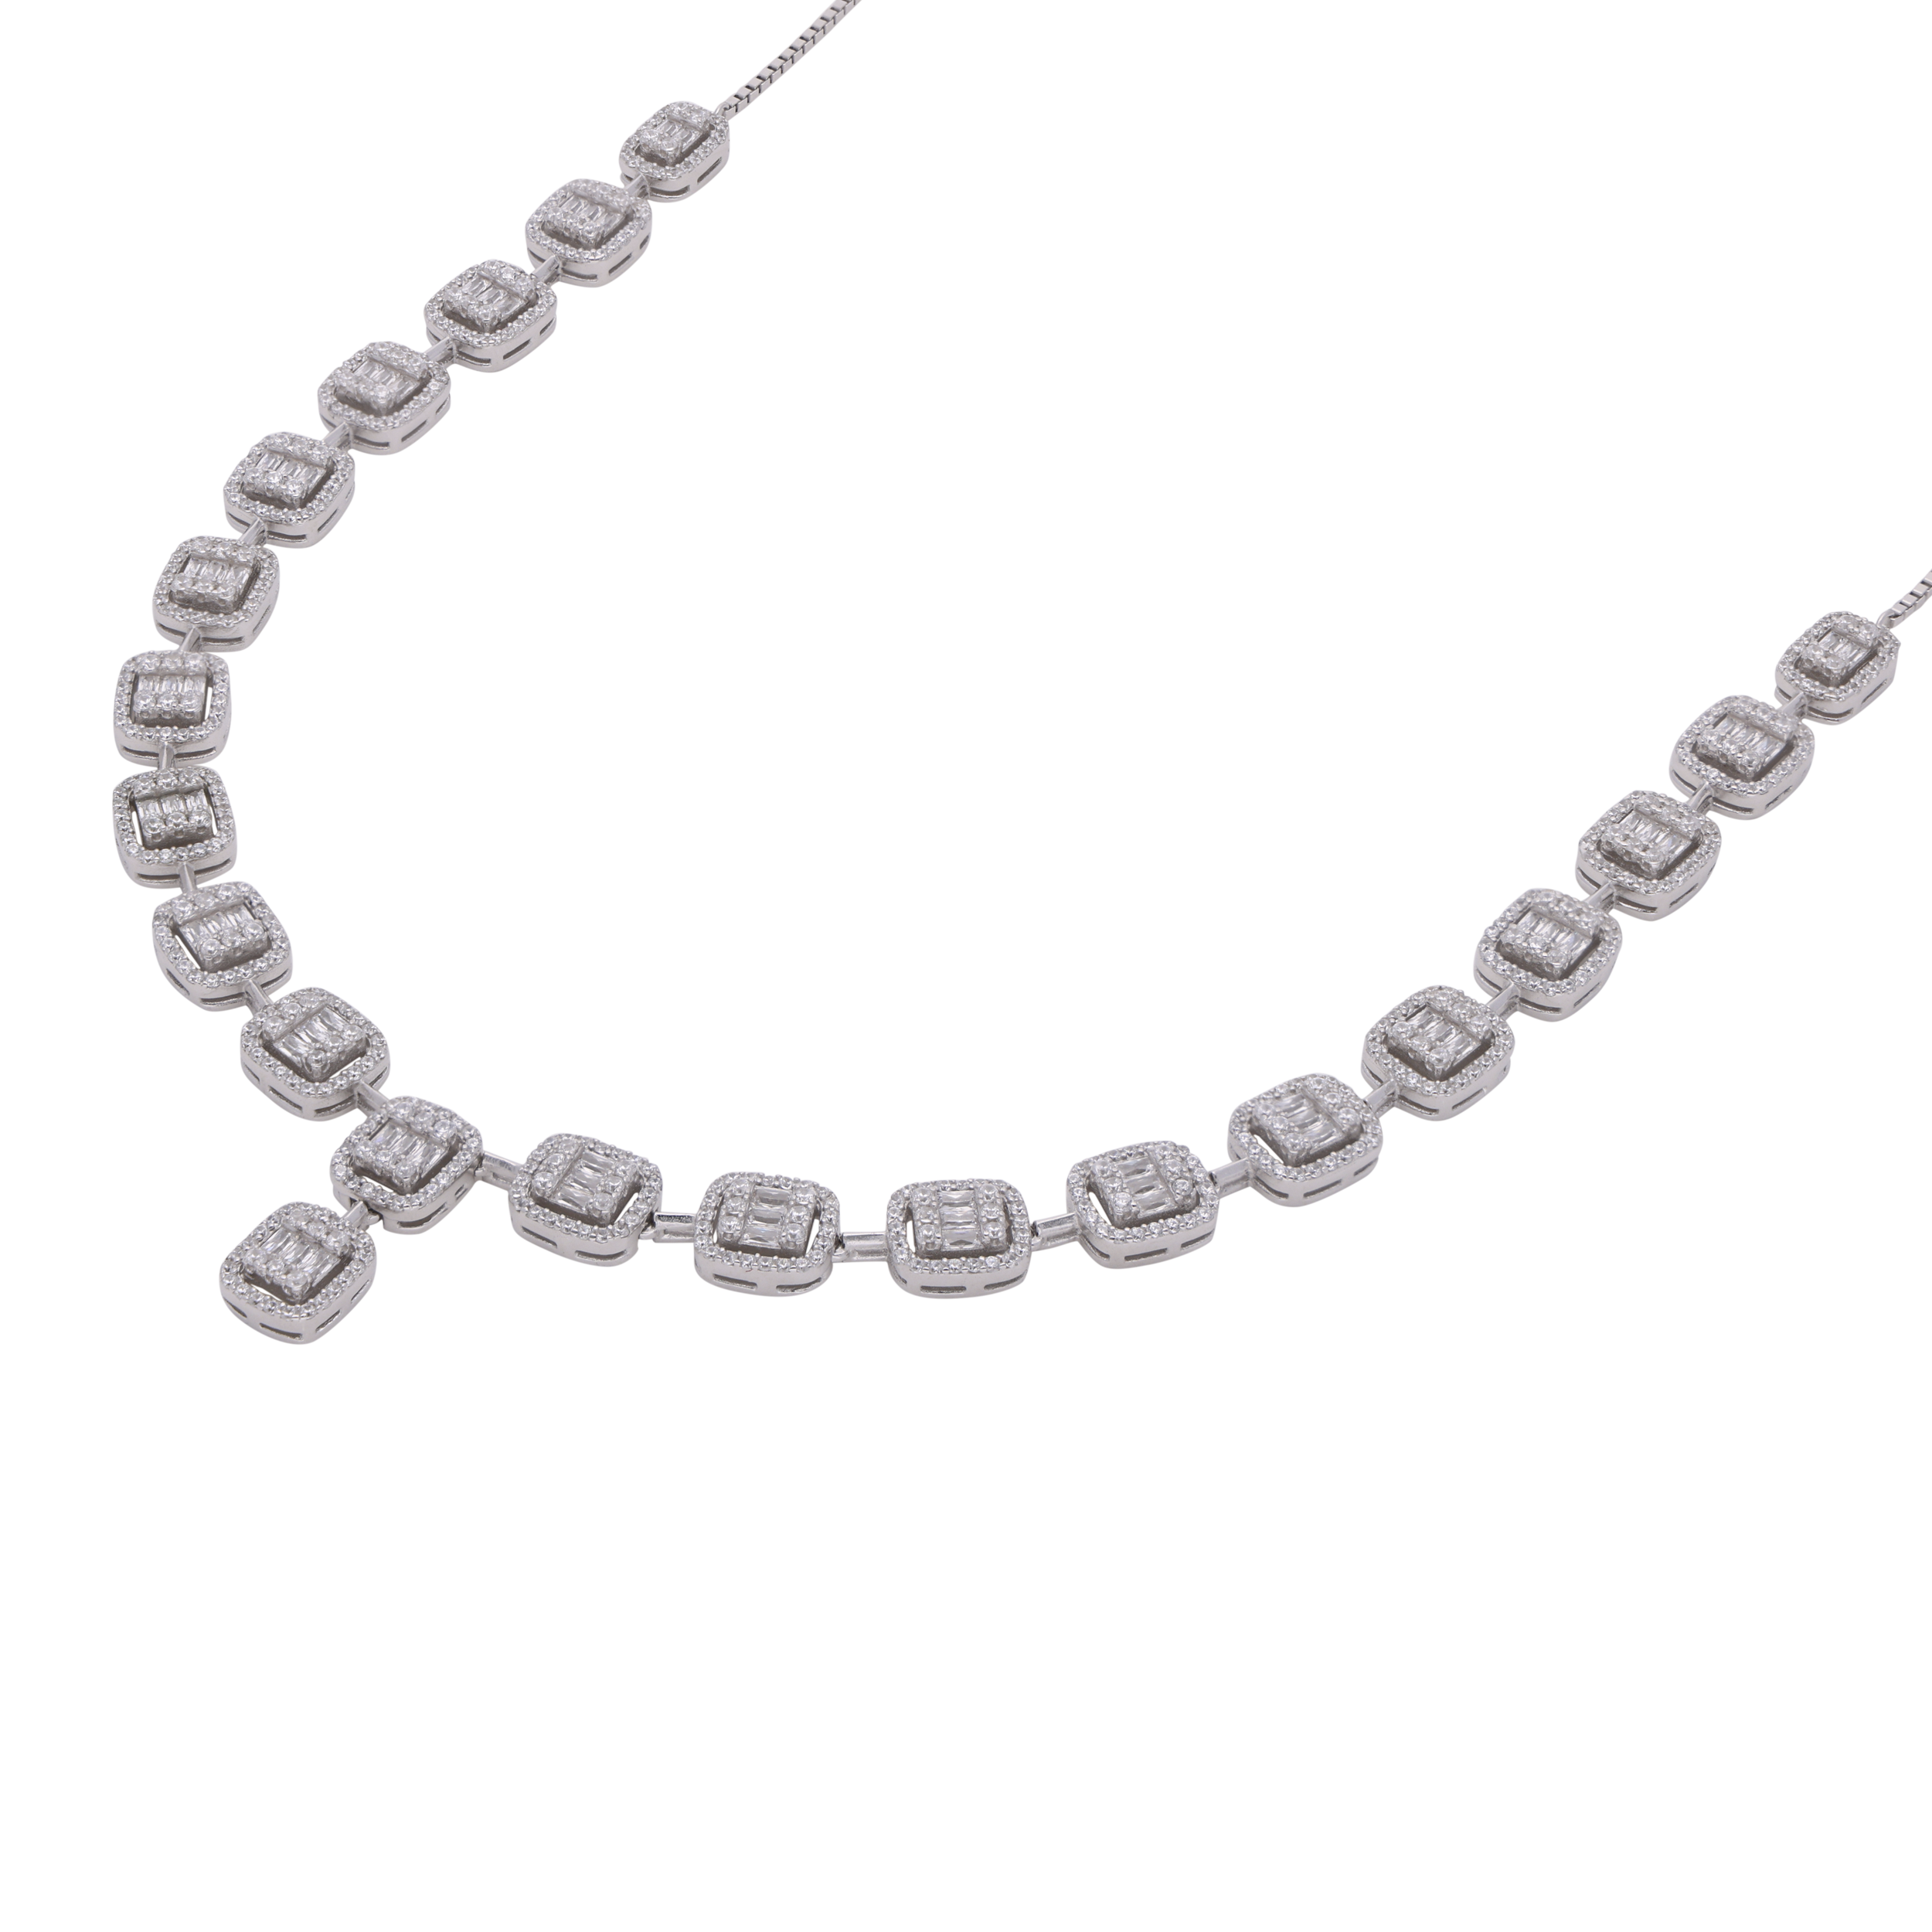 Sterling Silver Lightweight Fancy Necklace with Cubic Zirconia | SKU : 0003109090, 0003109052, 0003109076